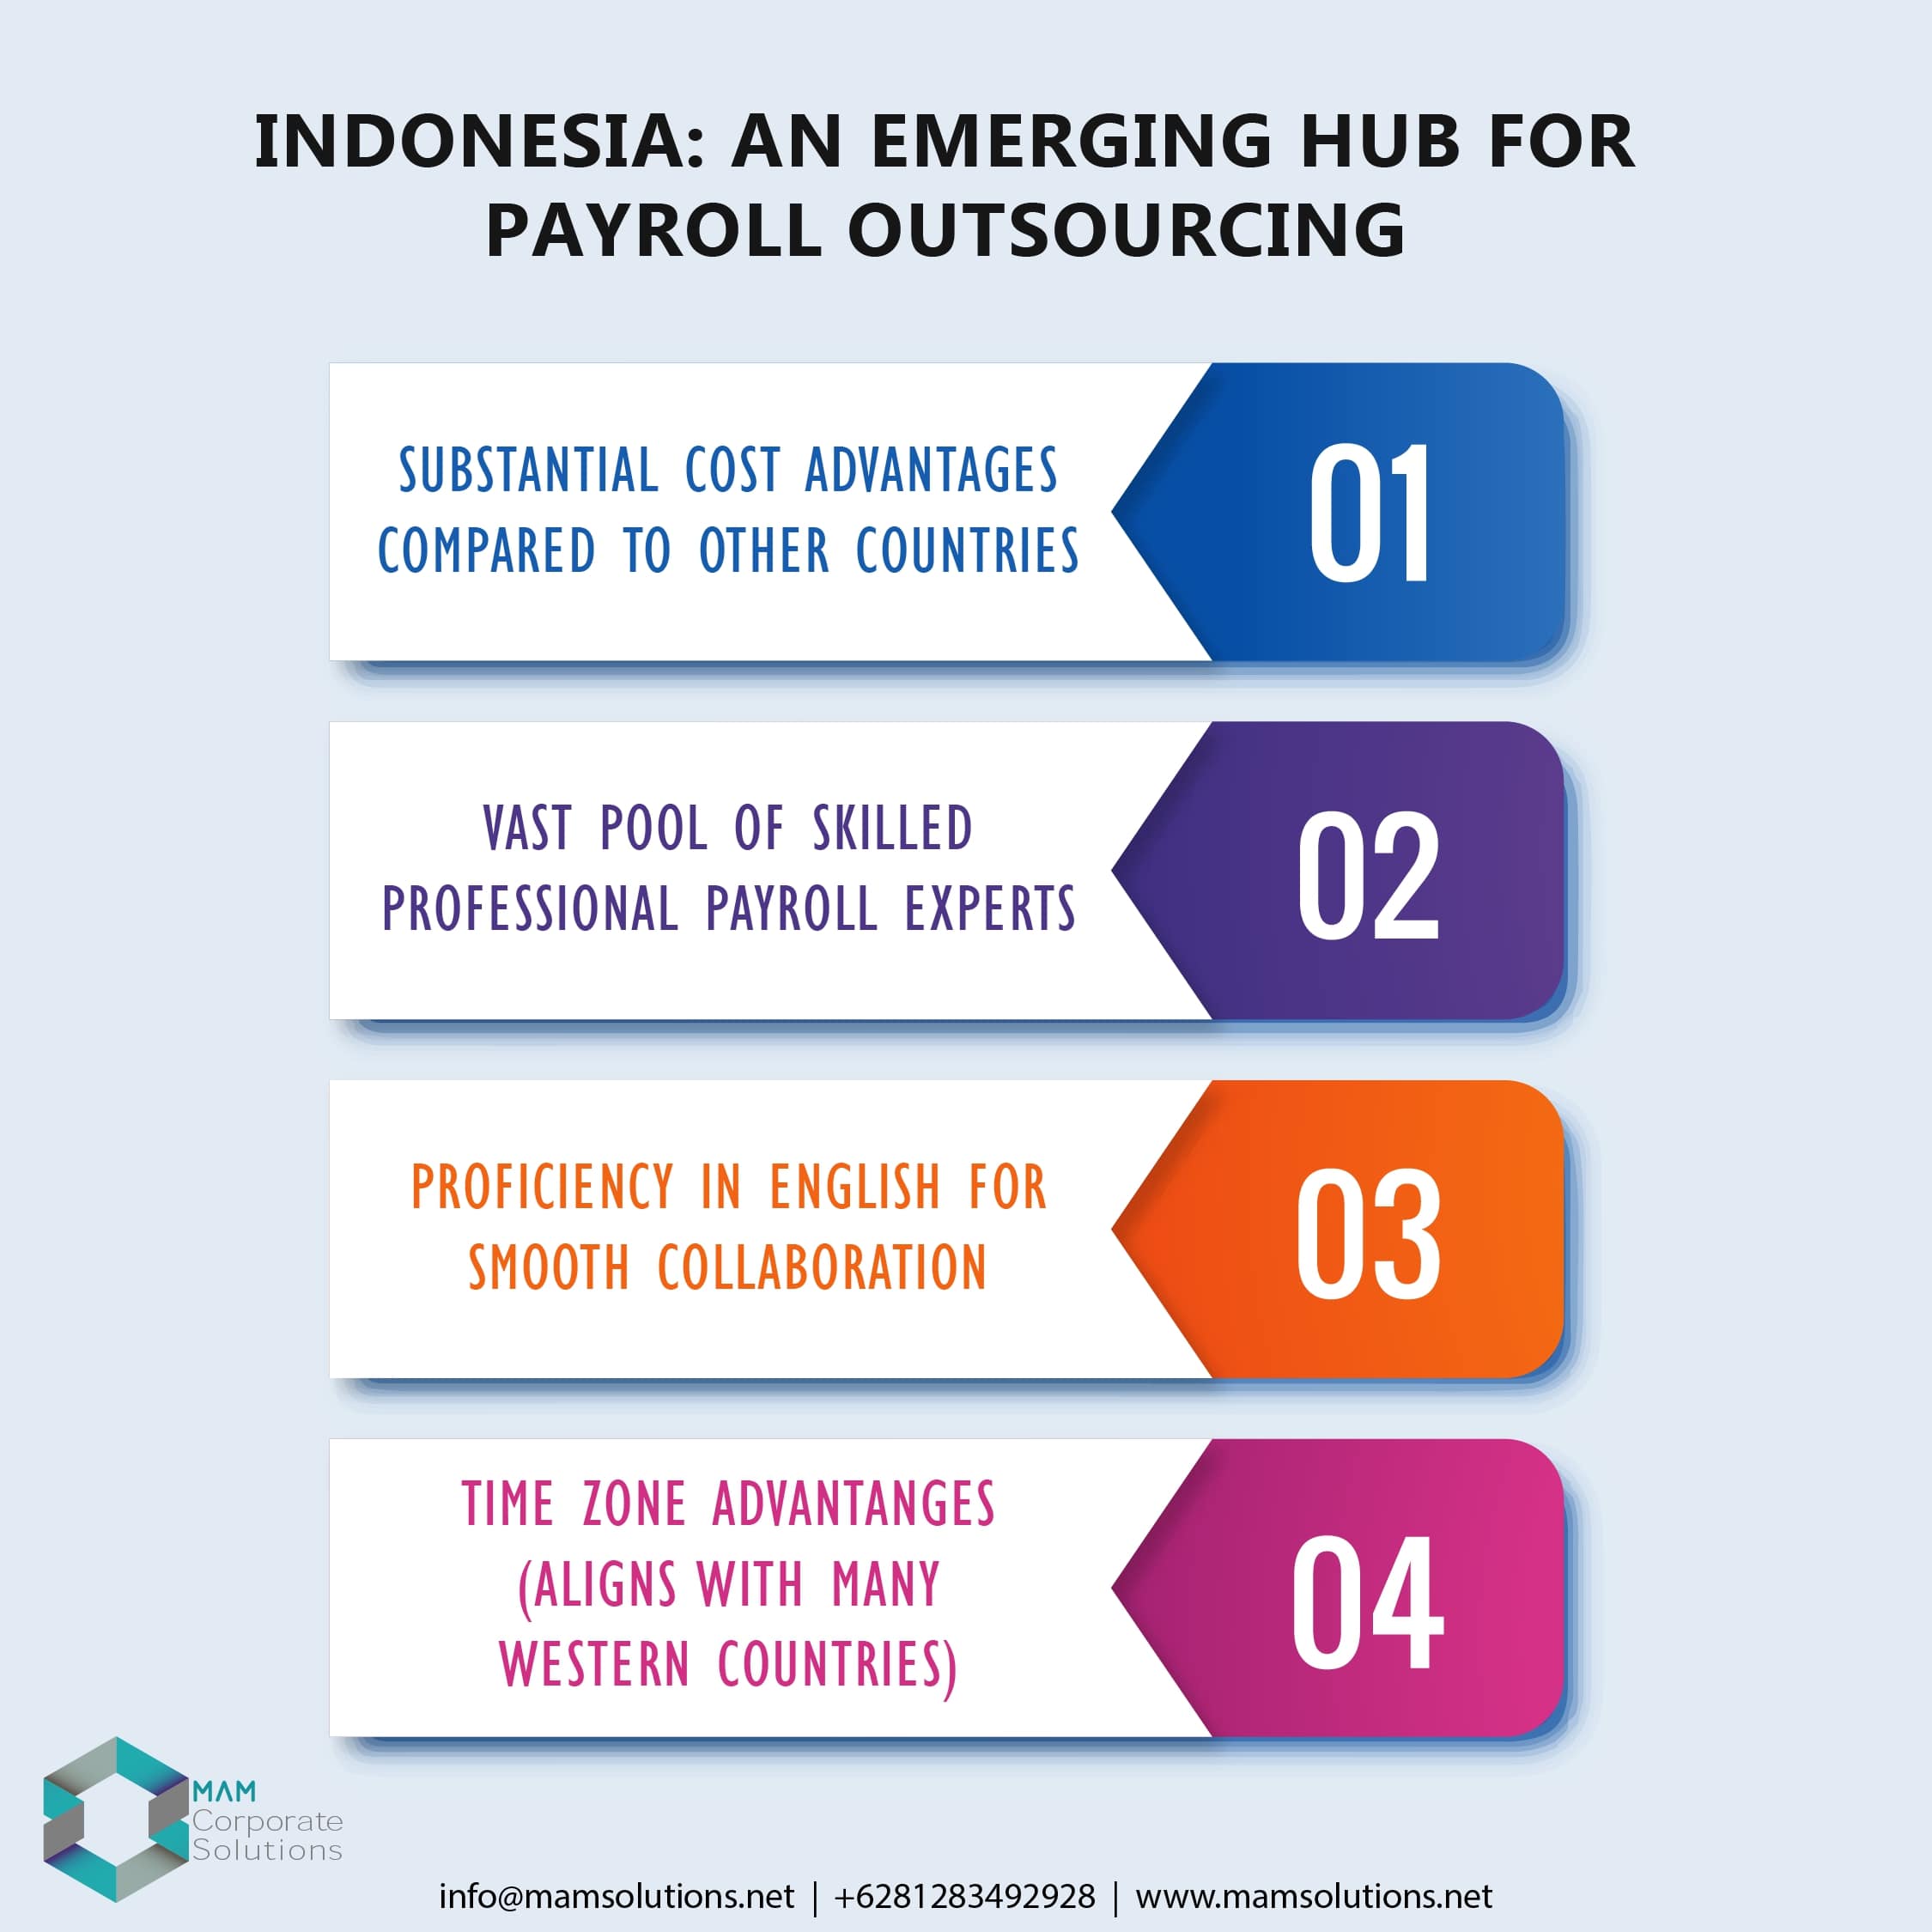 Indonesia is an Emerging hub for payroll outsourcing.